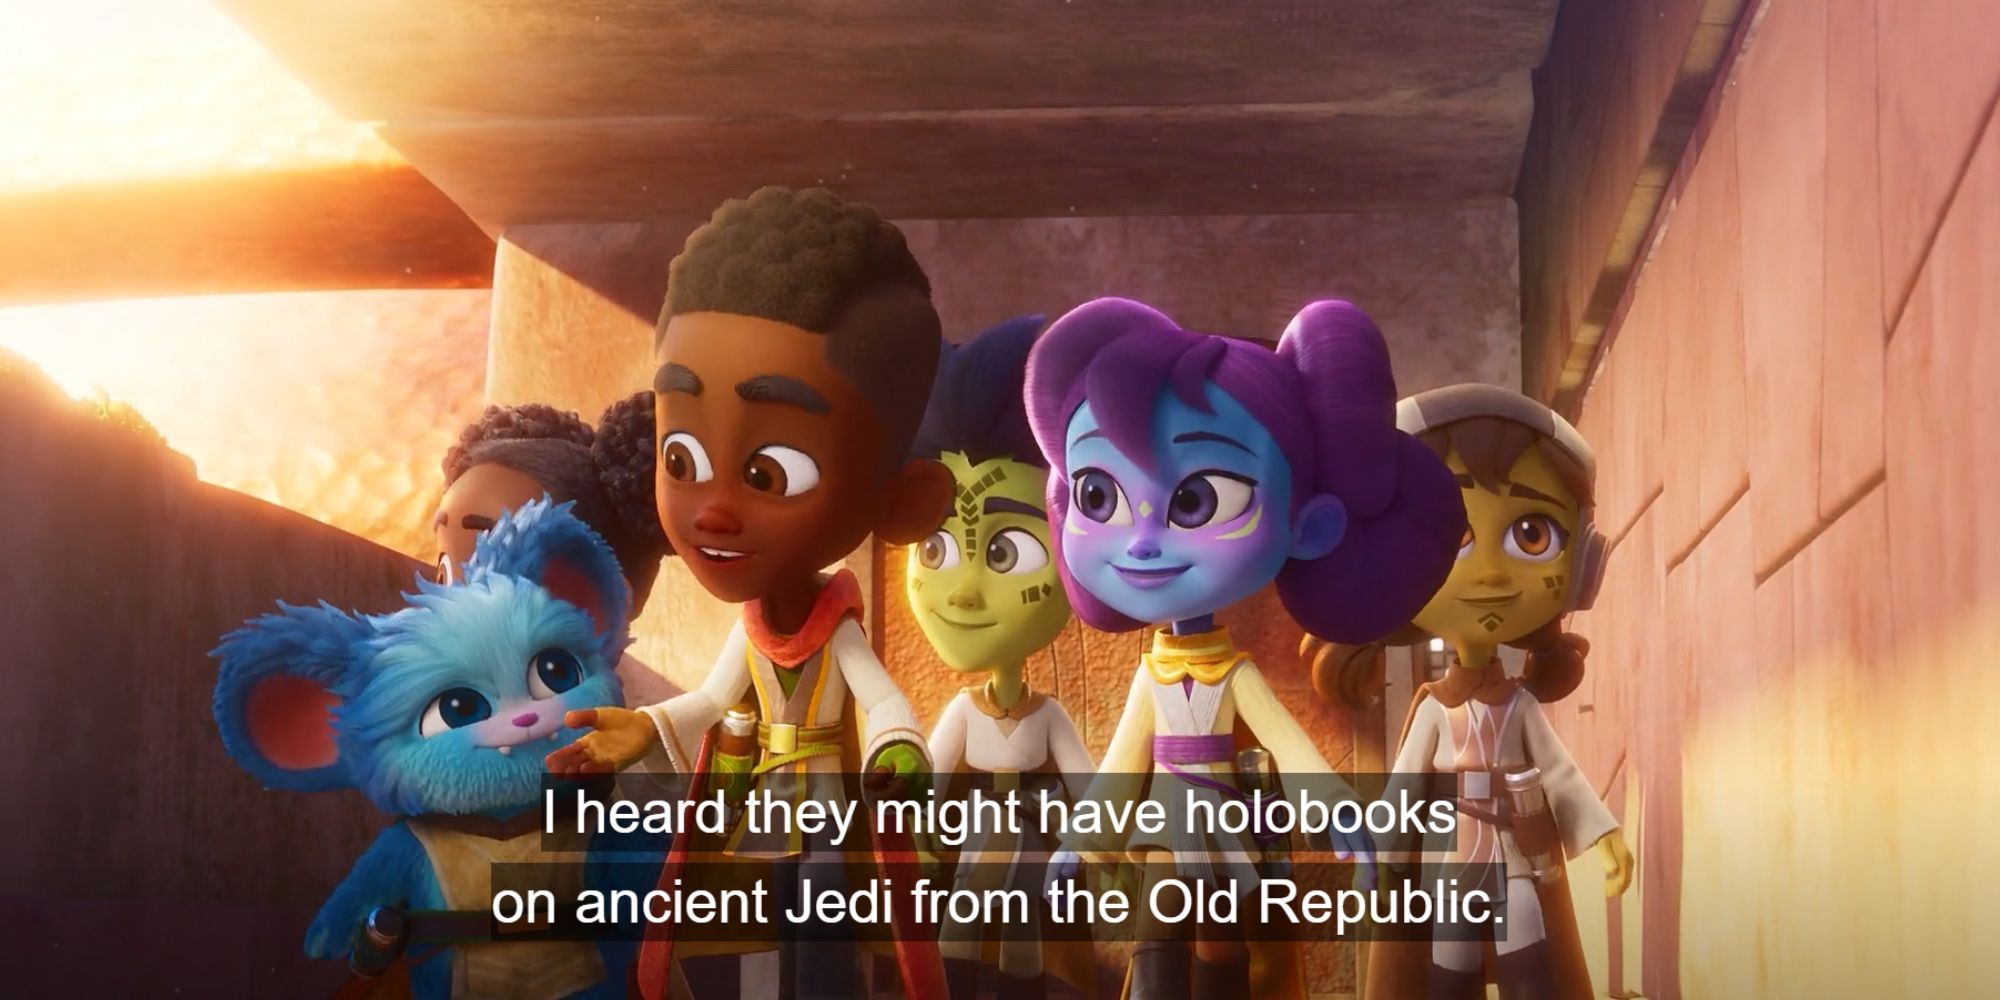 Star Wars Just Acknowledged The Old Republic Era… In A Show For Preschoolers